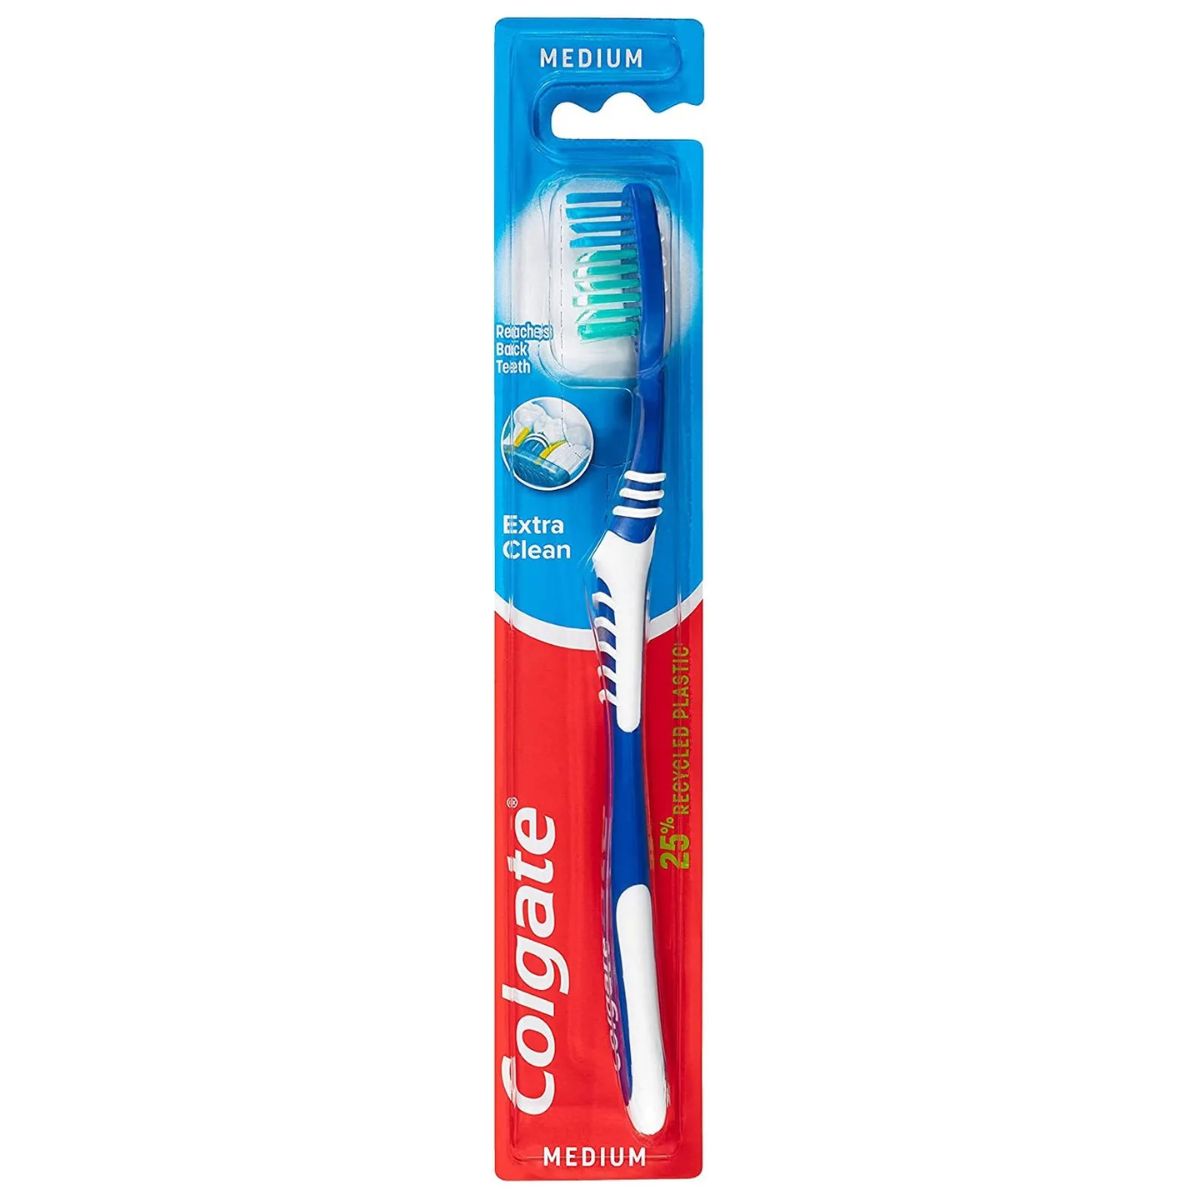 A Colgate - Extra Clean Medium Toothbrush - 1pcs in a package.